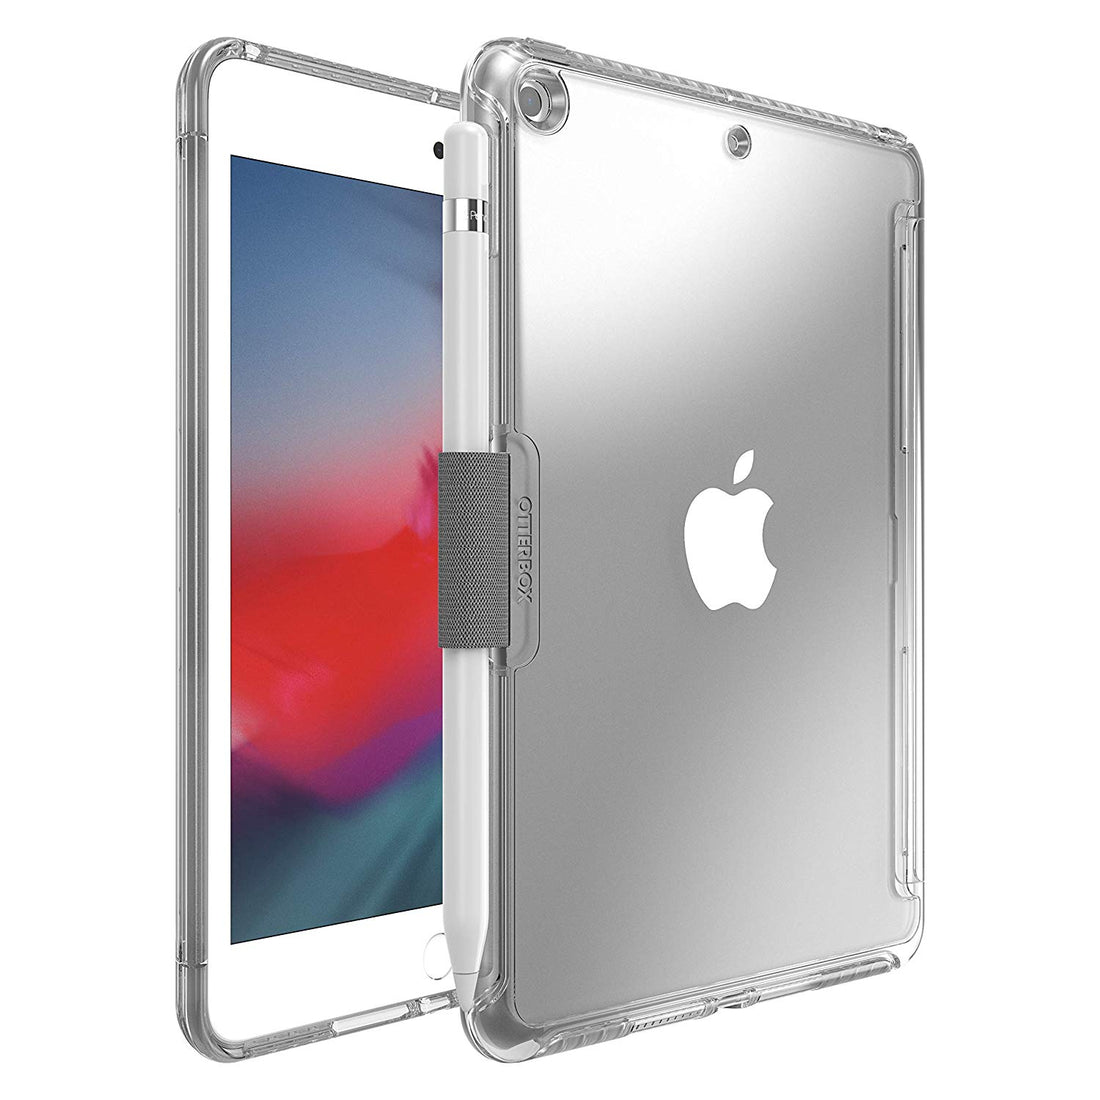 OtterBox SYMMETRY SERIES Case for Apple iPad Mini 5th Gen - Clear (Certified Refurbished)